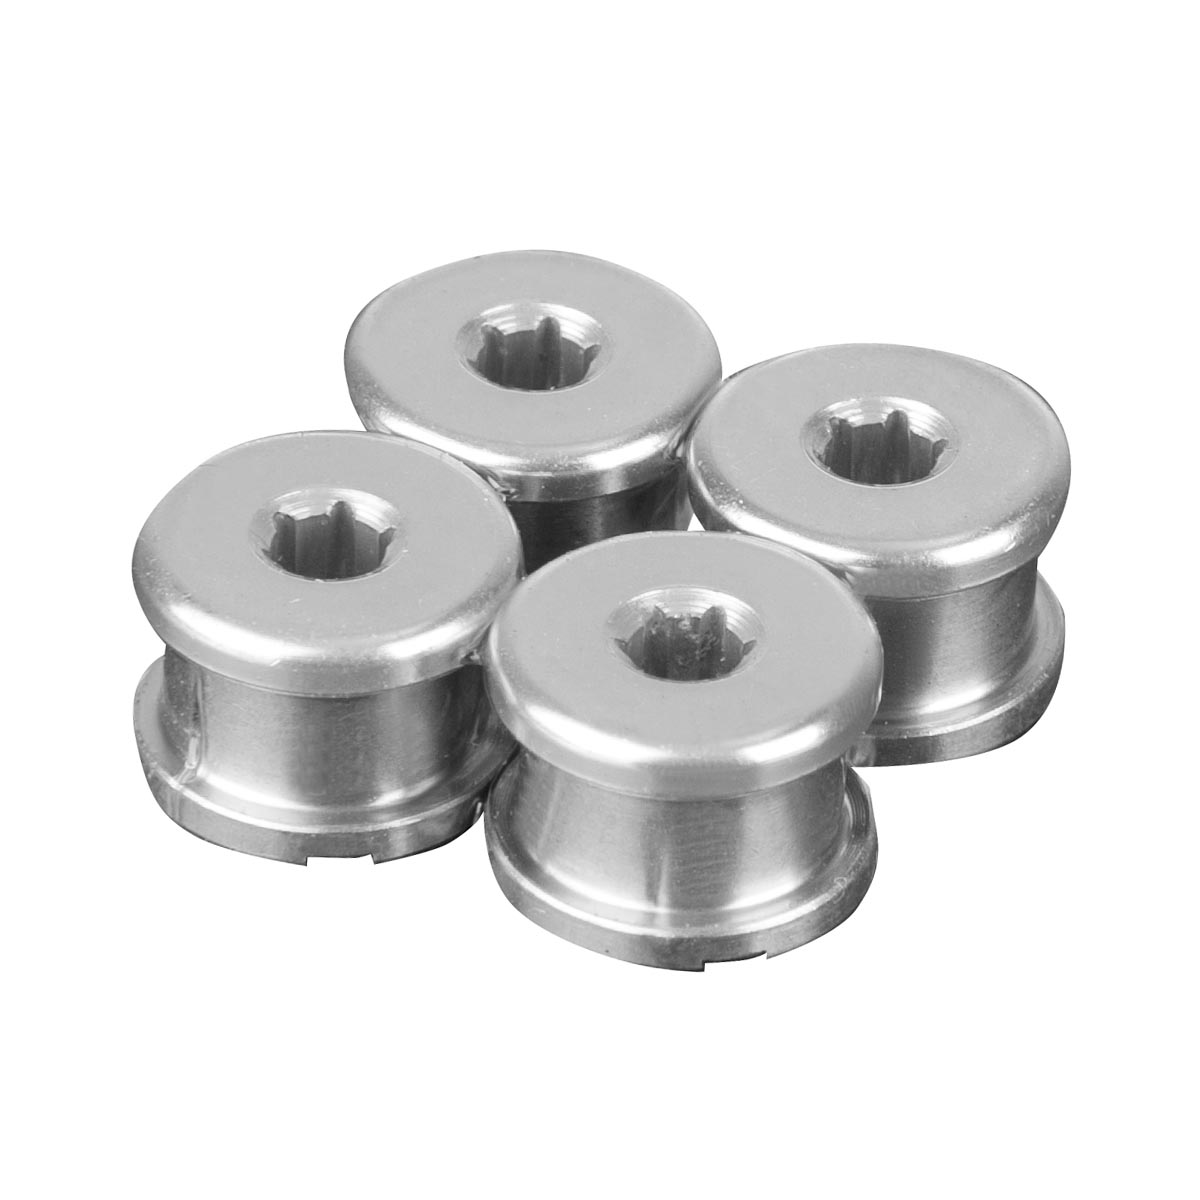 E*thirteen Chain Ring Bolts  T25 6 mm Aluminium, 5 mm Threaded Sleeves made from Steel, Silver